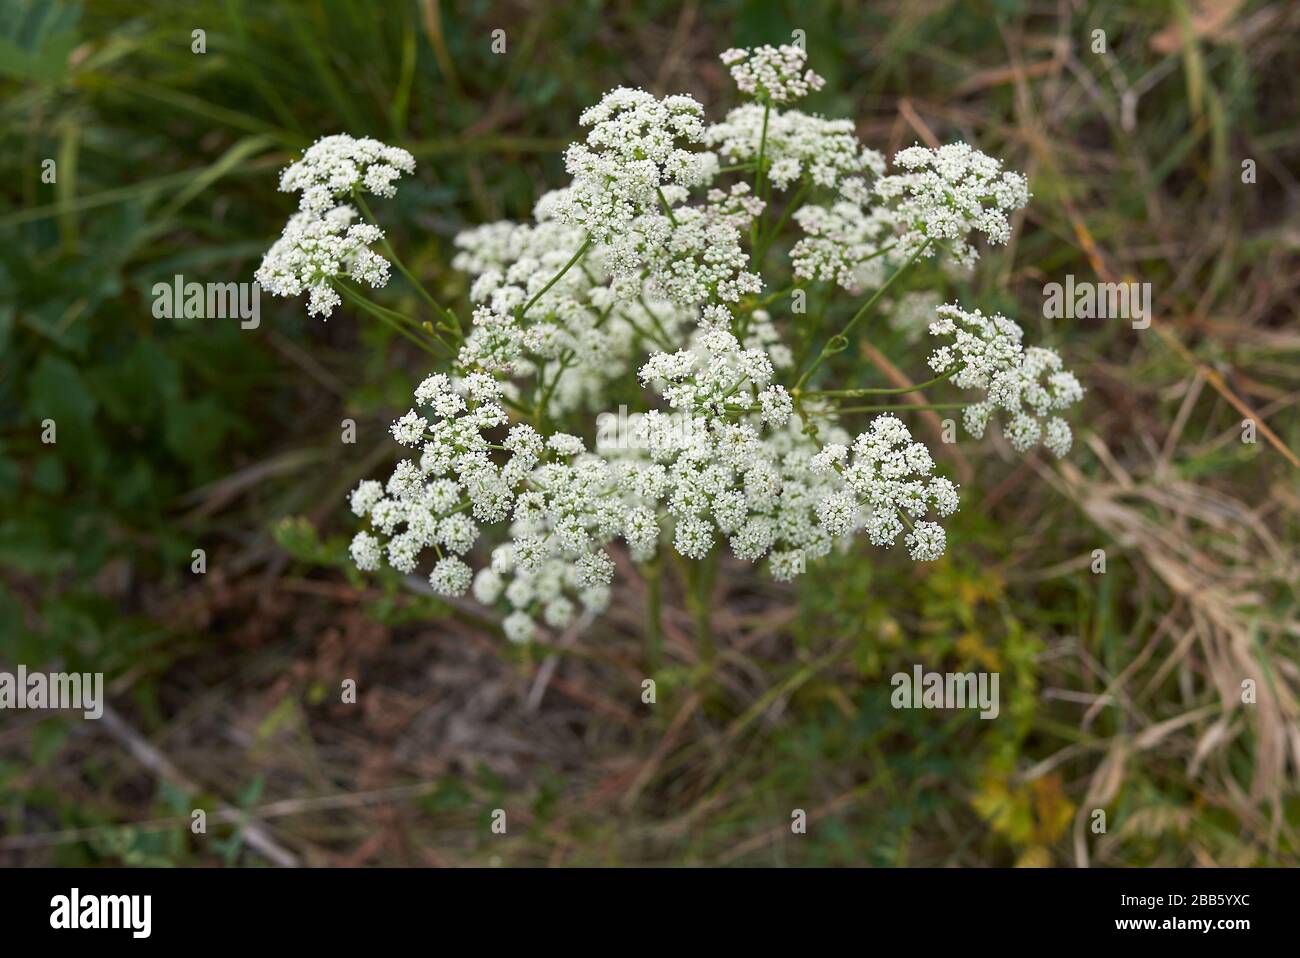 Aethusa cynapium plant with white flowers Stock Photo